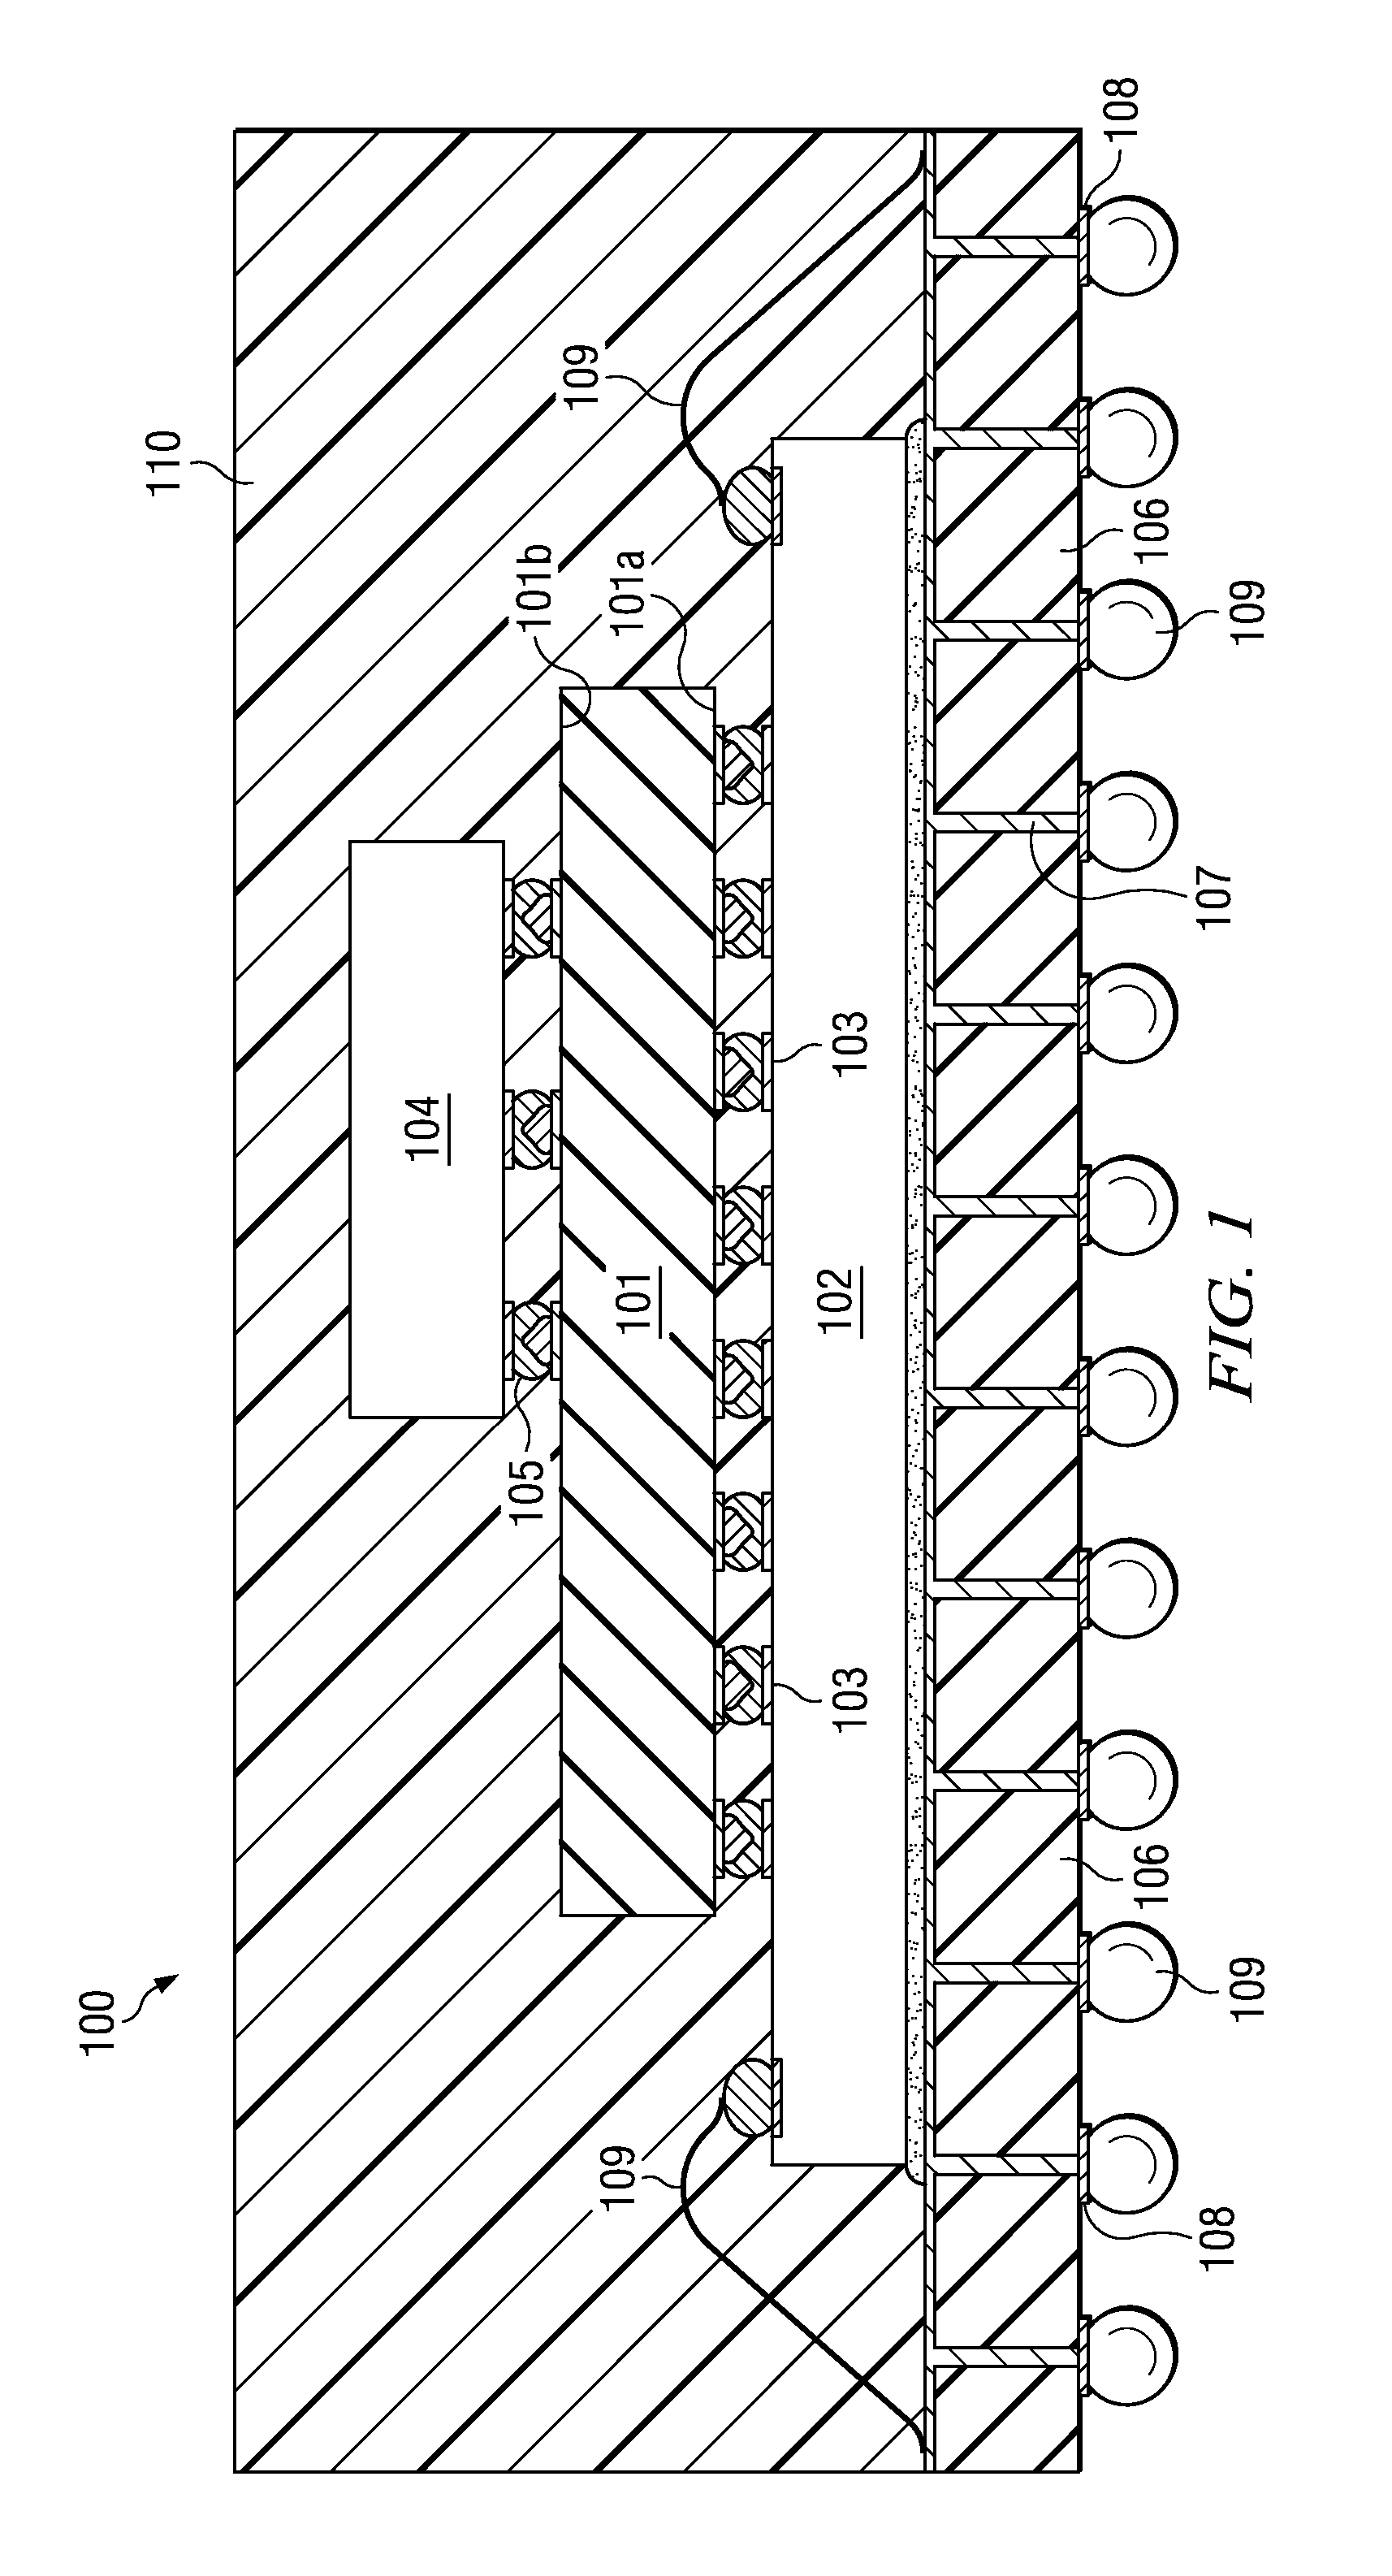 Gold-bumped interposer for vertically integrated semiconductor system